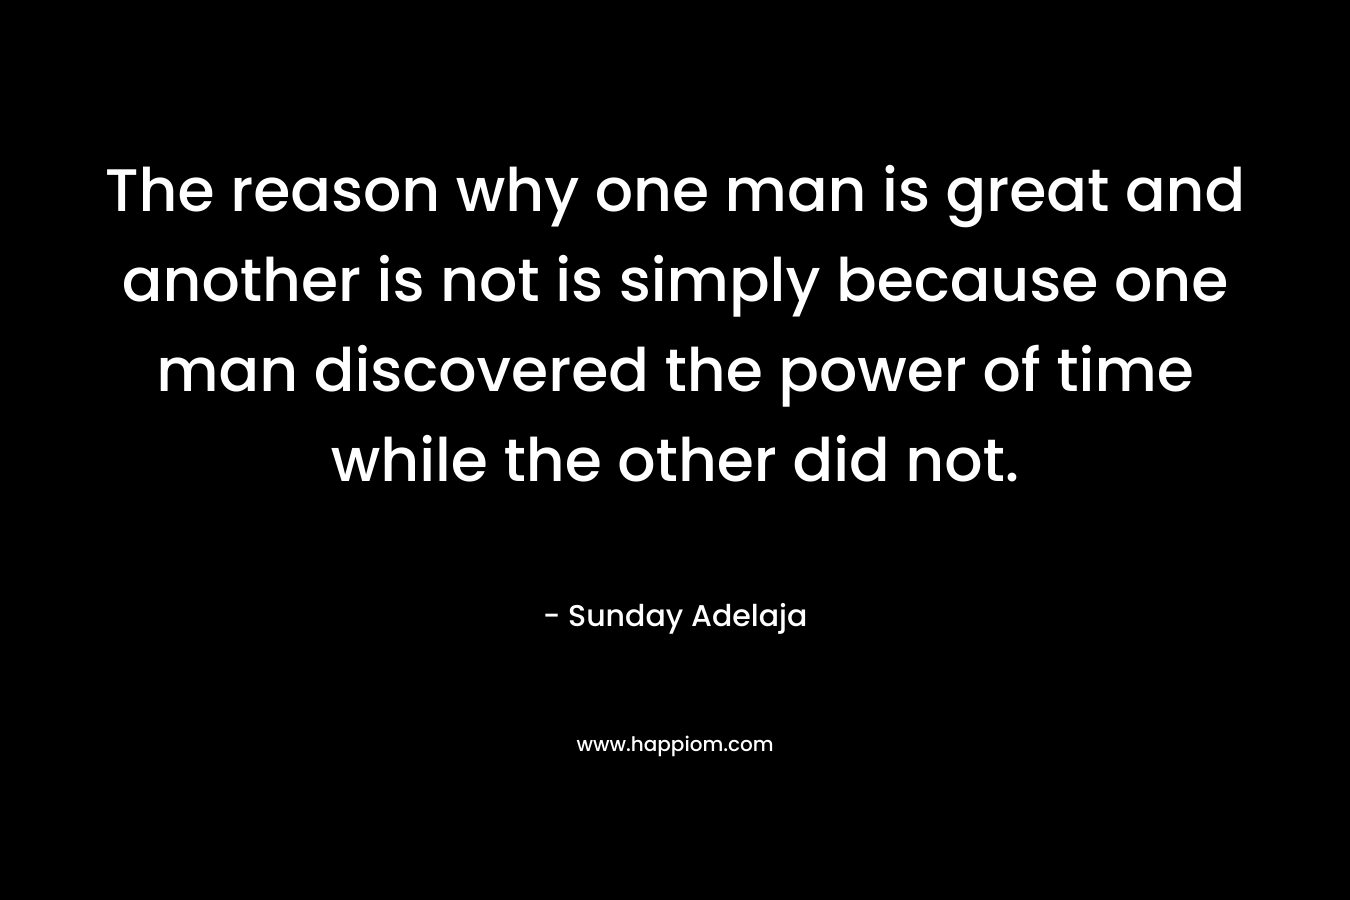 The reason why one man is great and another is not is simply because one man discovered the power of time while the other did not.